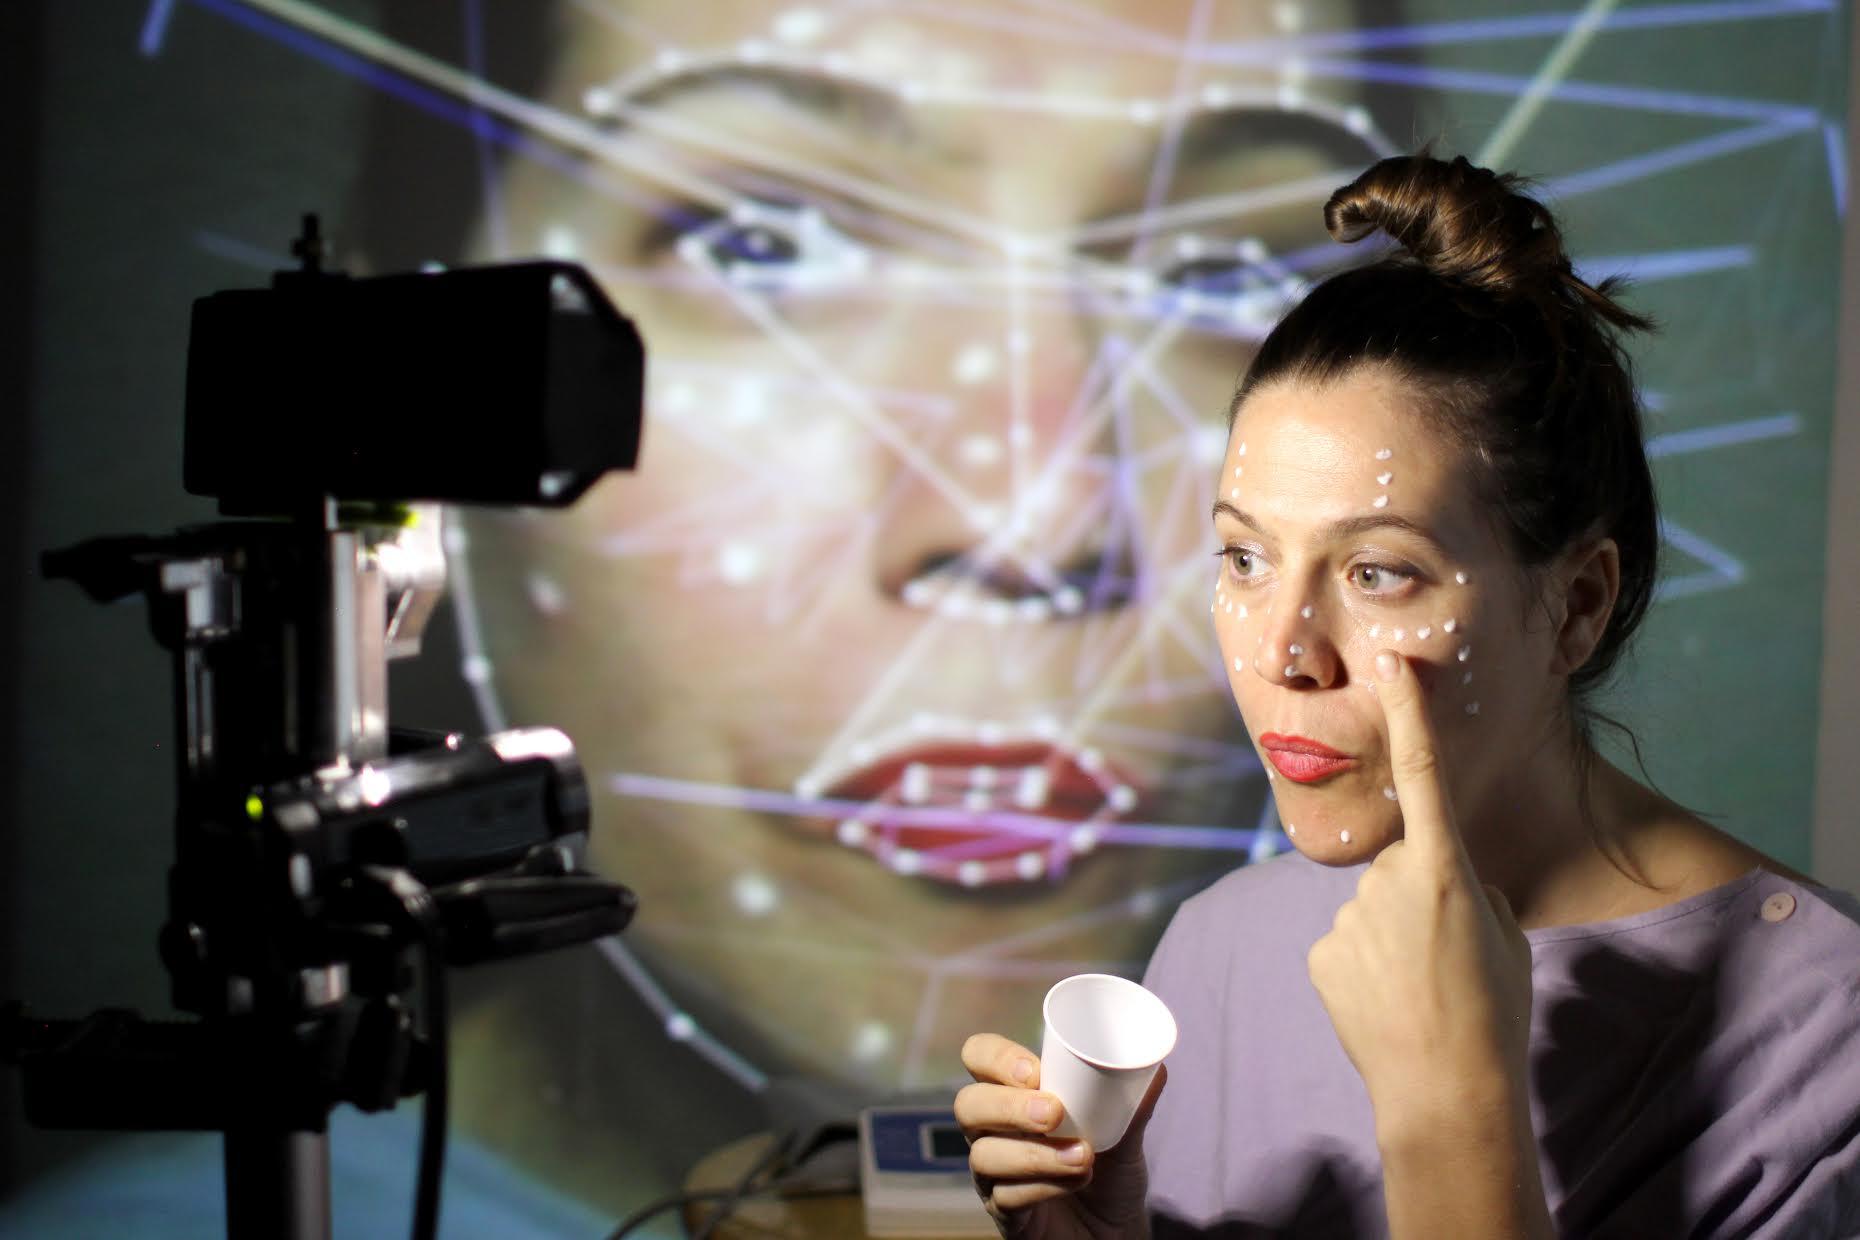 Mutlimedia performer Anna Oxygen works with eye tracking software in building a 3D creation